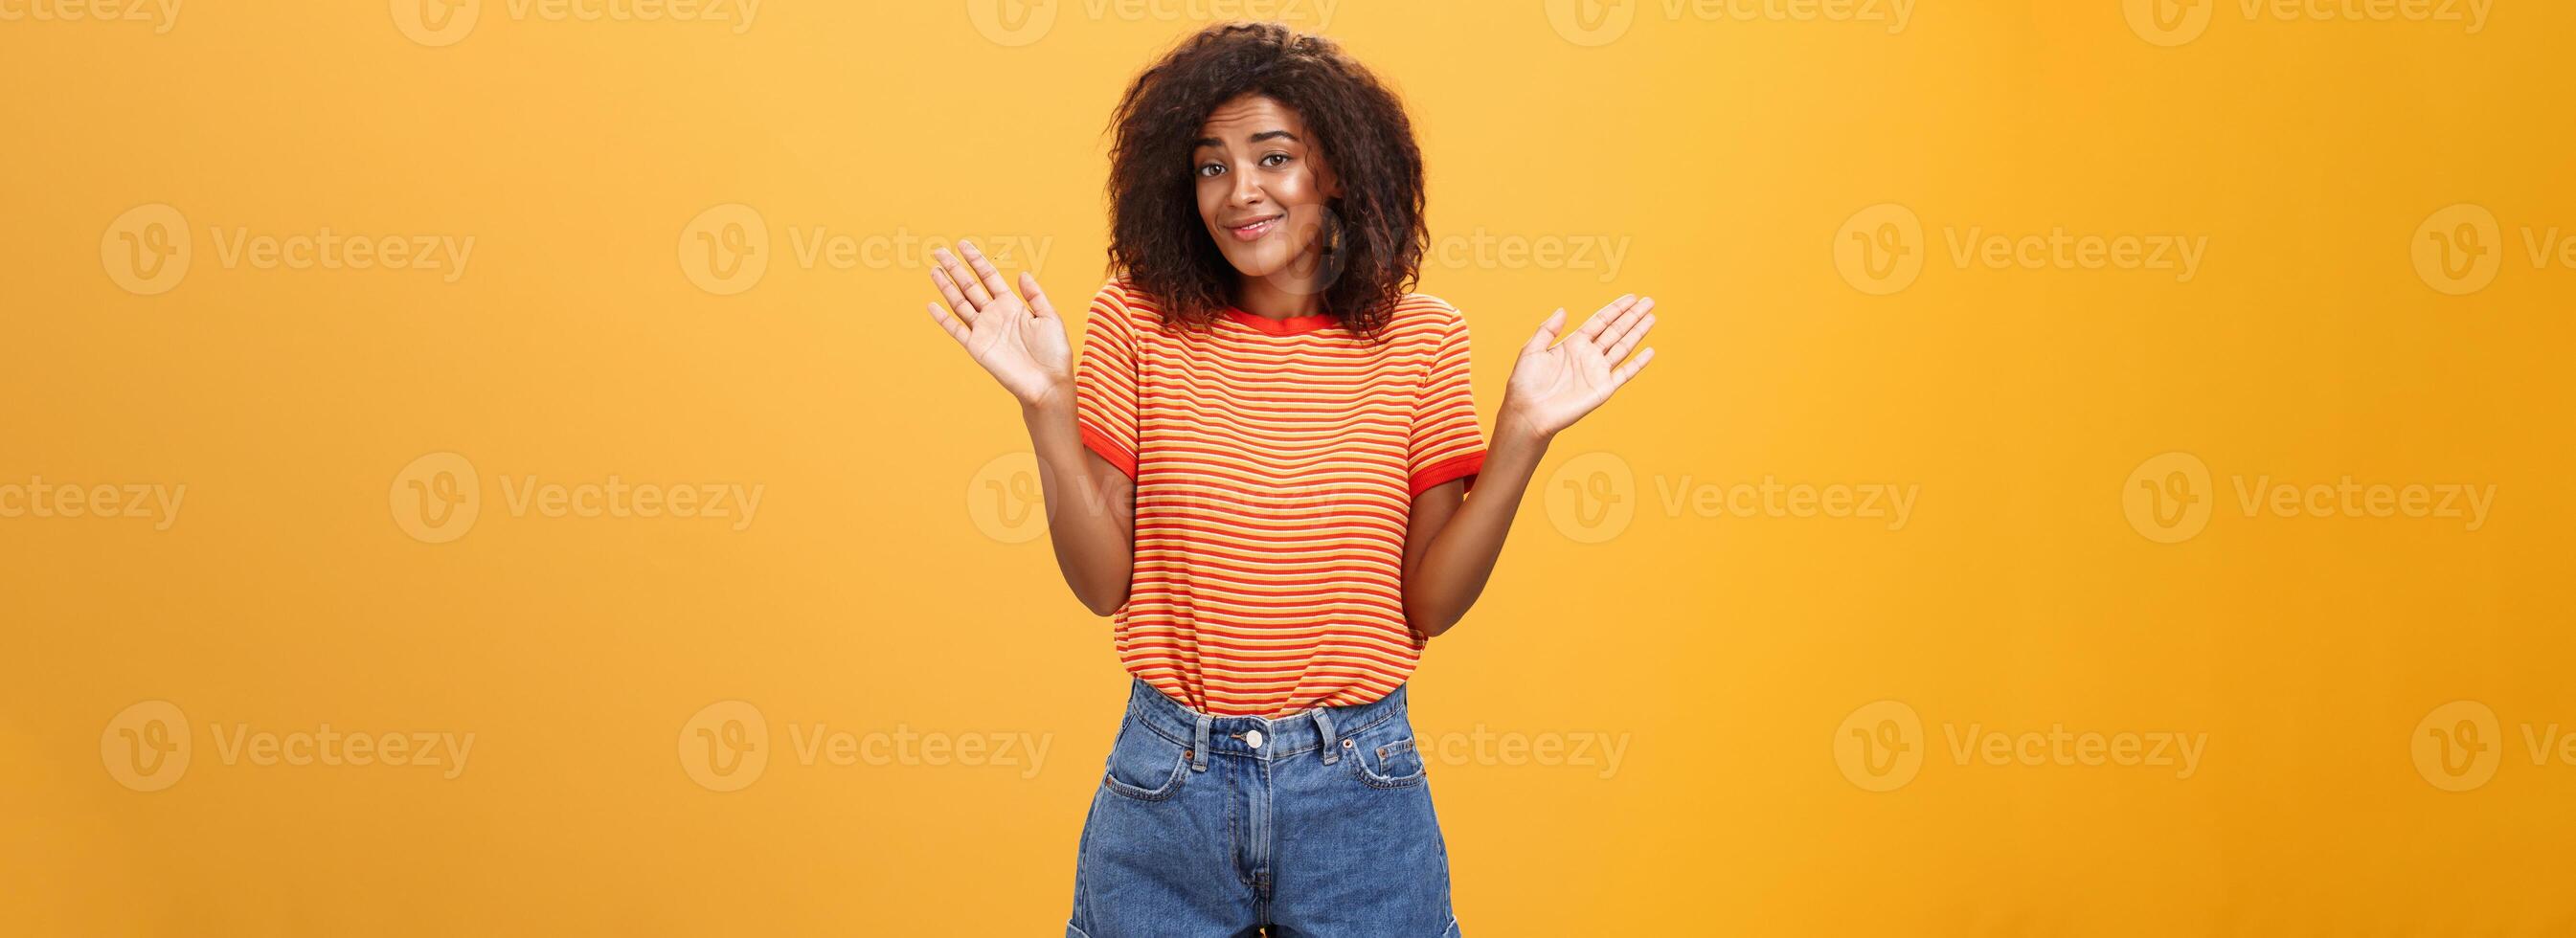 No idea do not care. Careless and indifferent calm happy african american woman with curly hair in summer clothes raising palms and shrugging in uninvolved pose smiling carefree being unaware photo